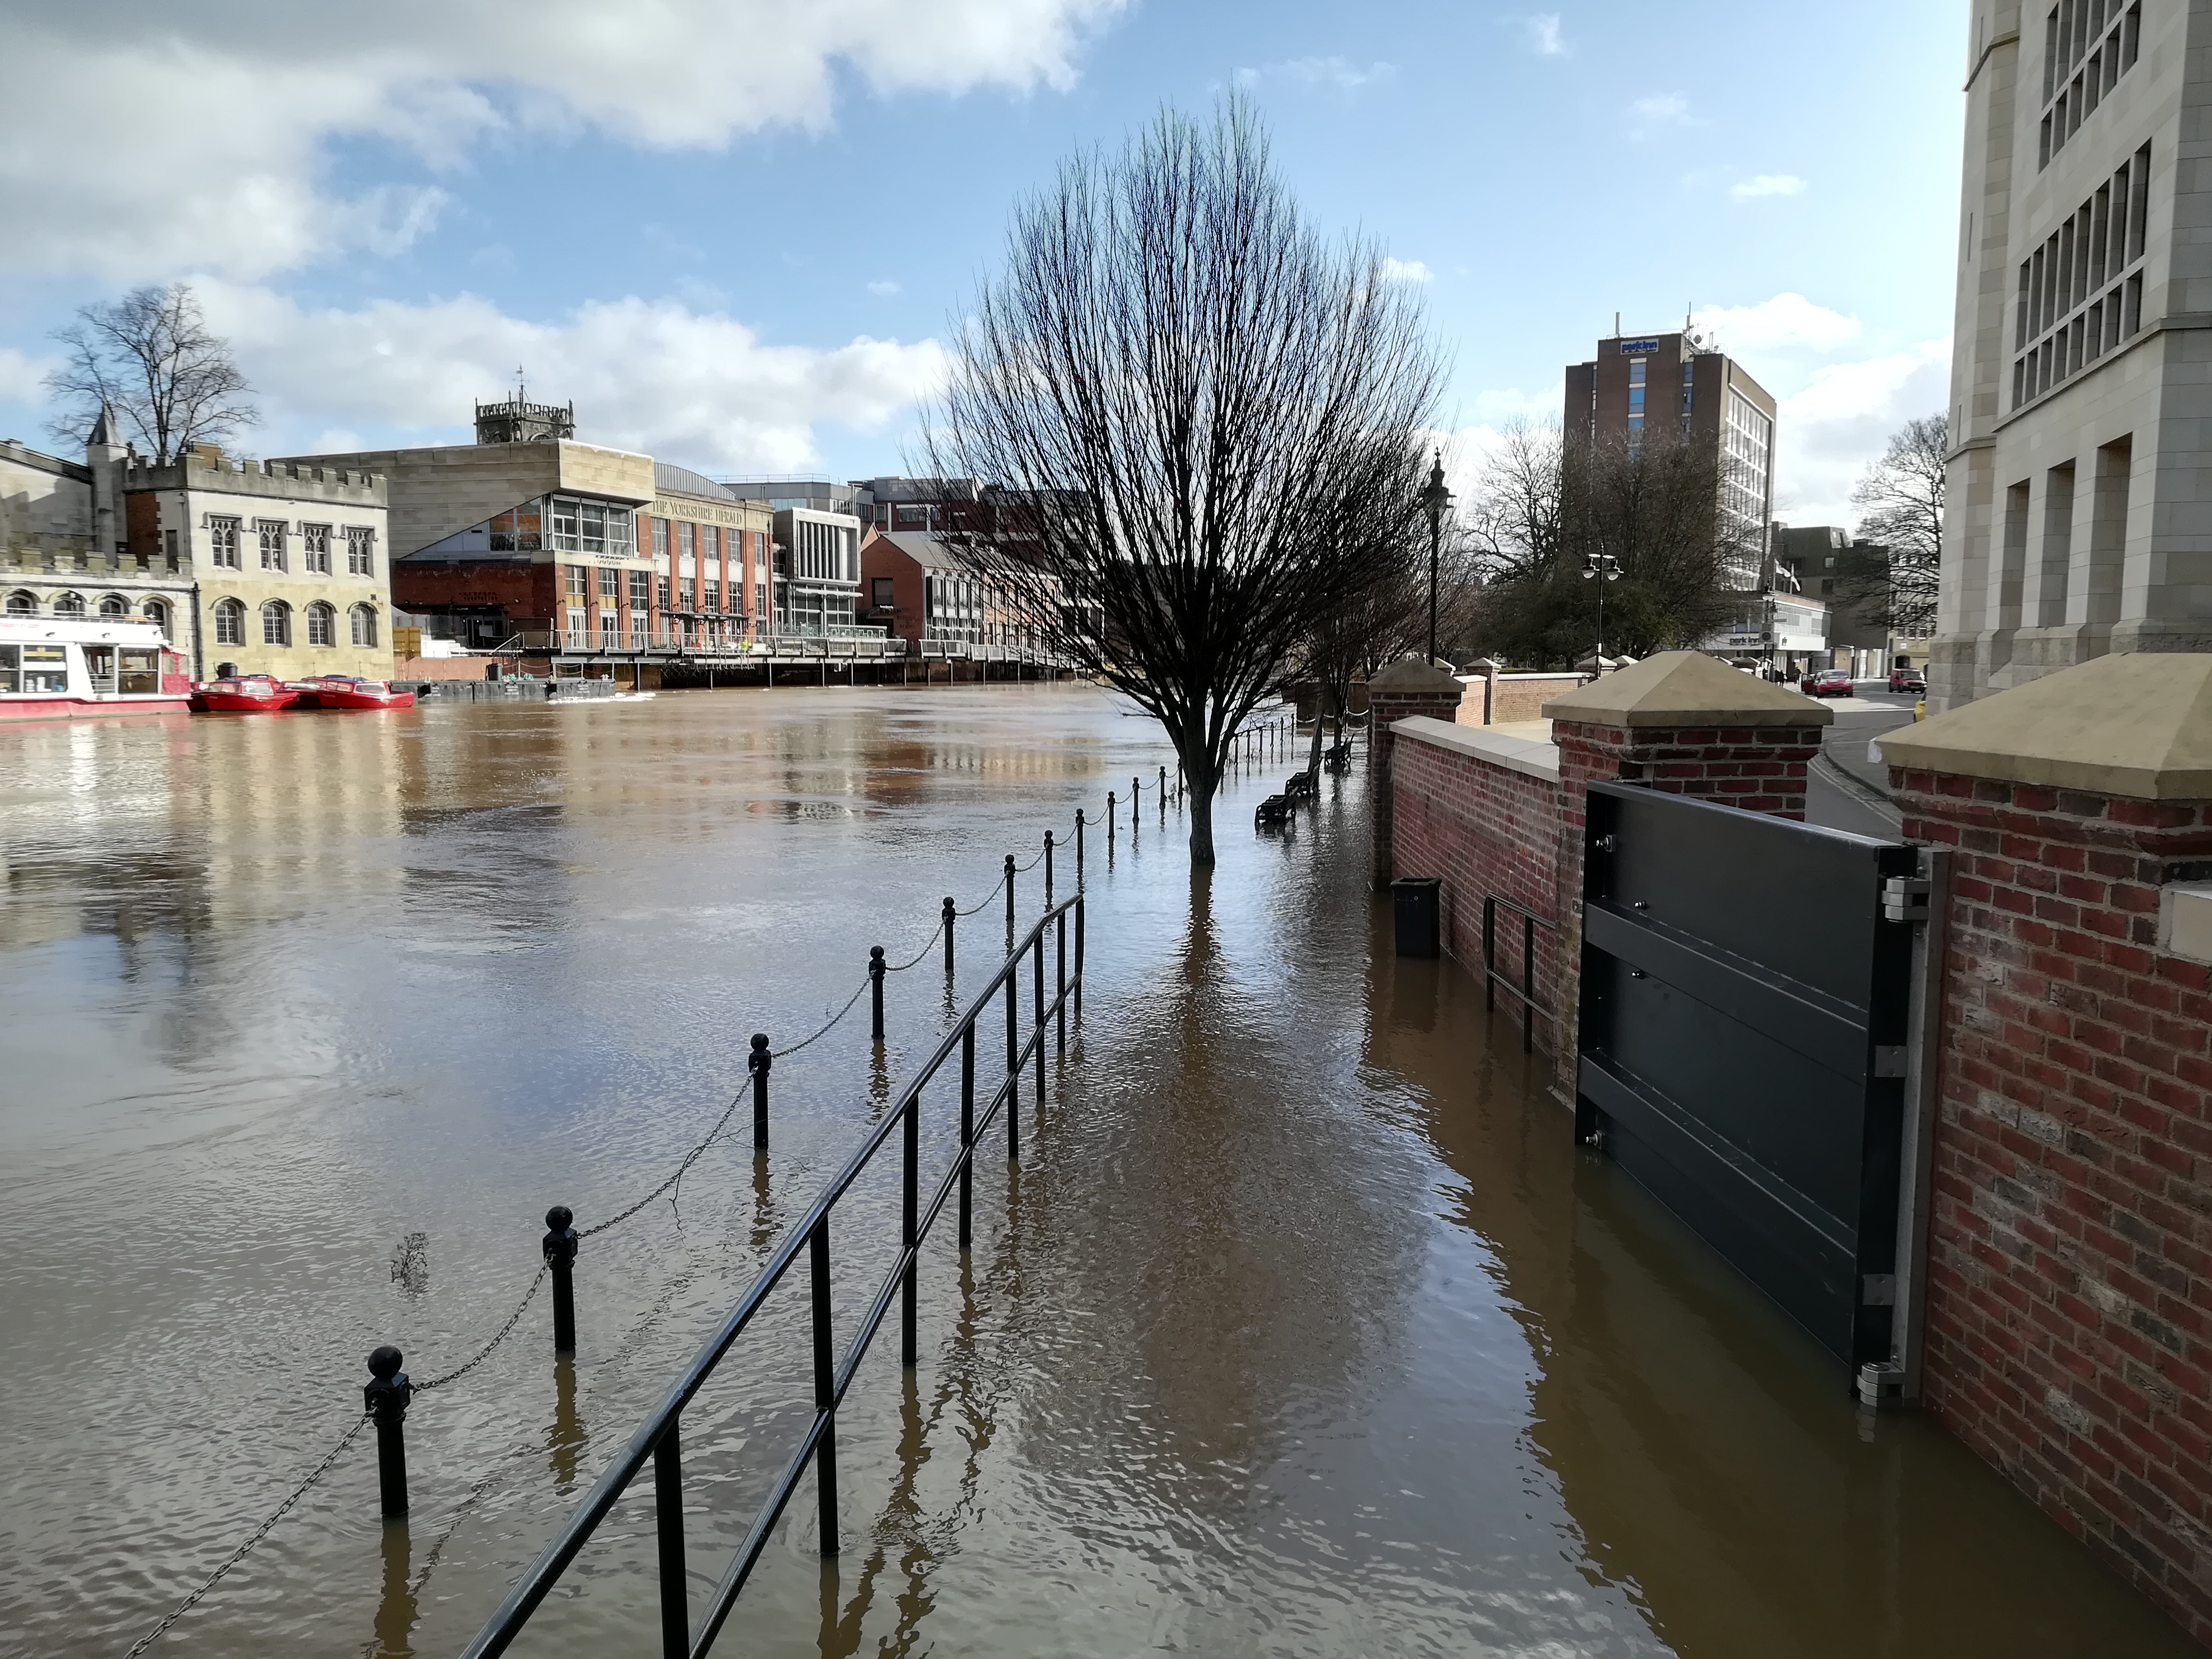 The North Street flood defences in action during the February 2020 flooding